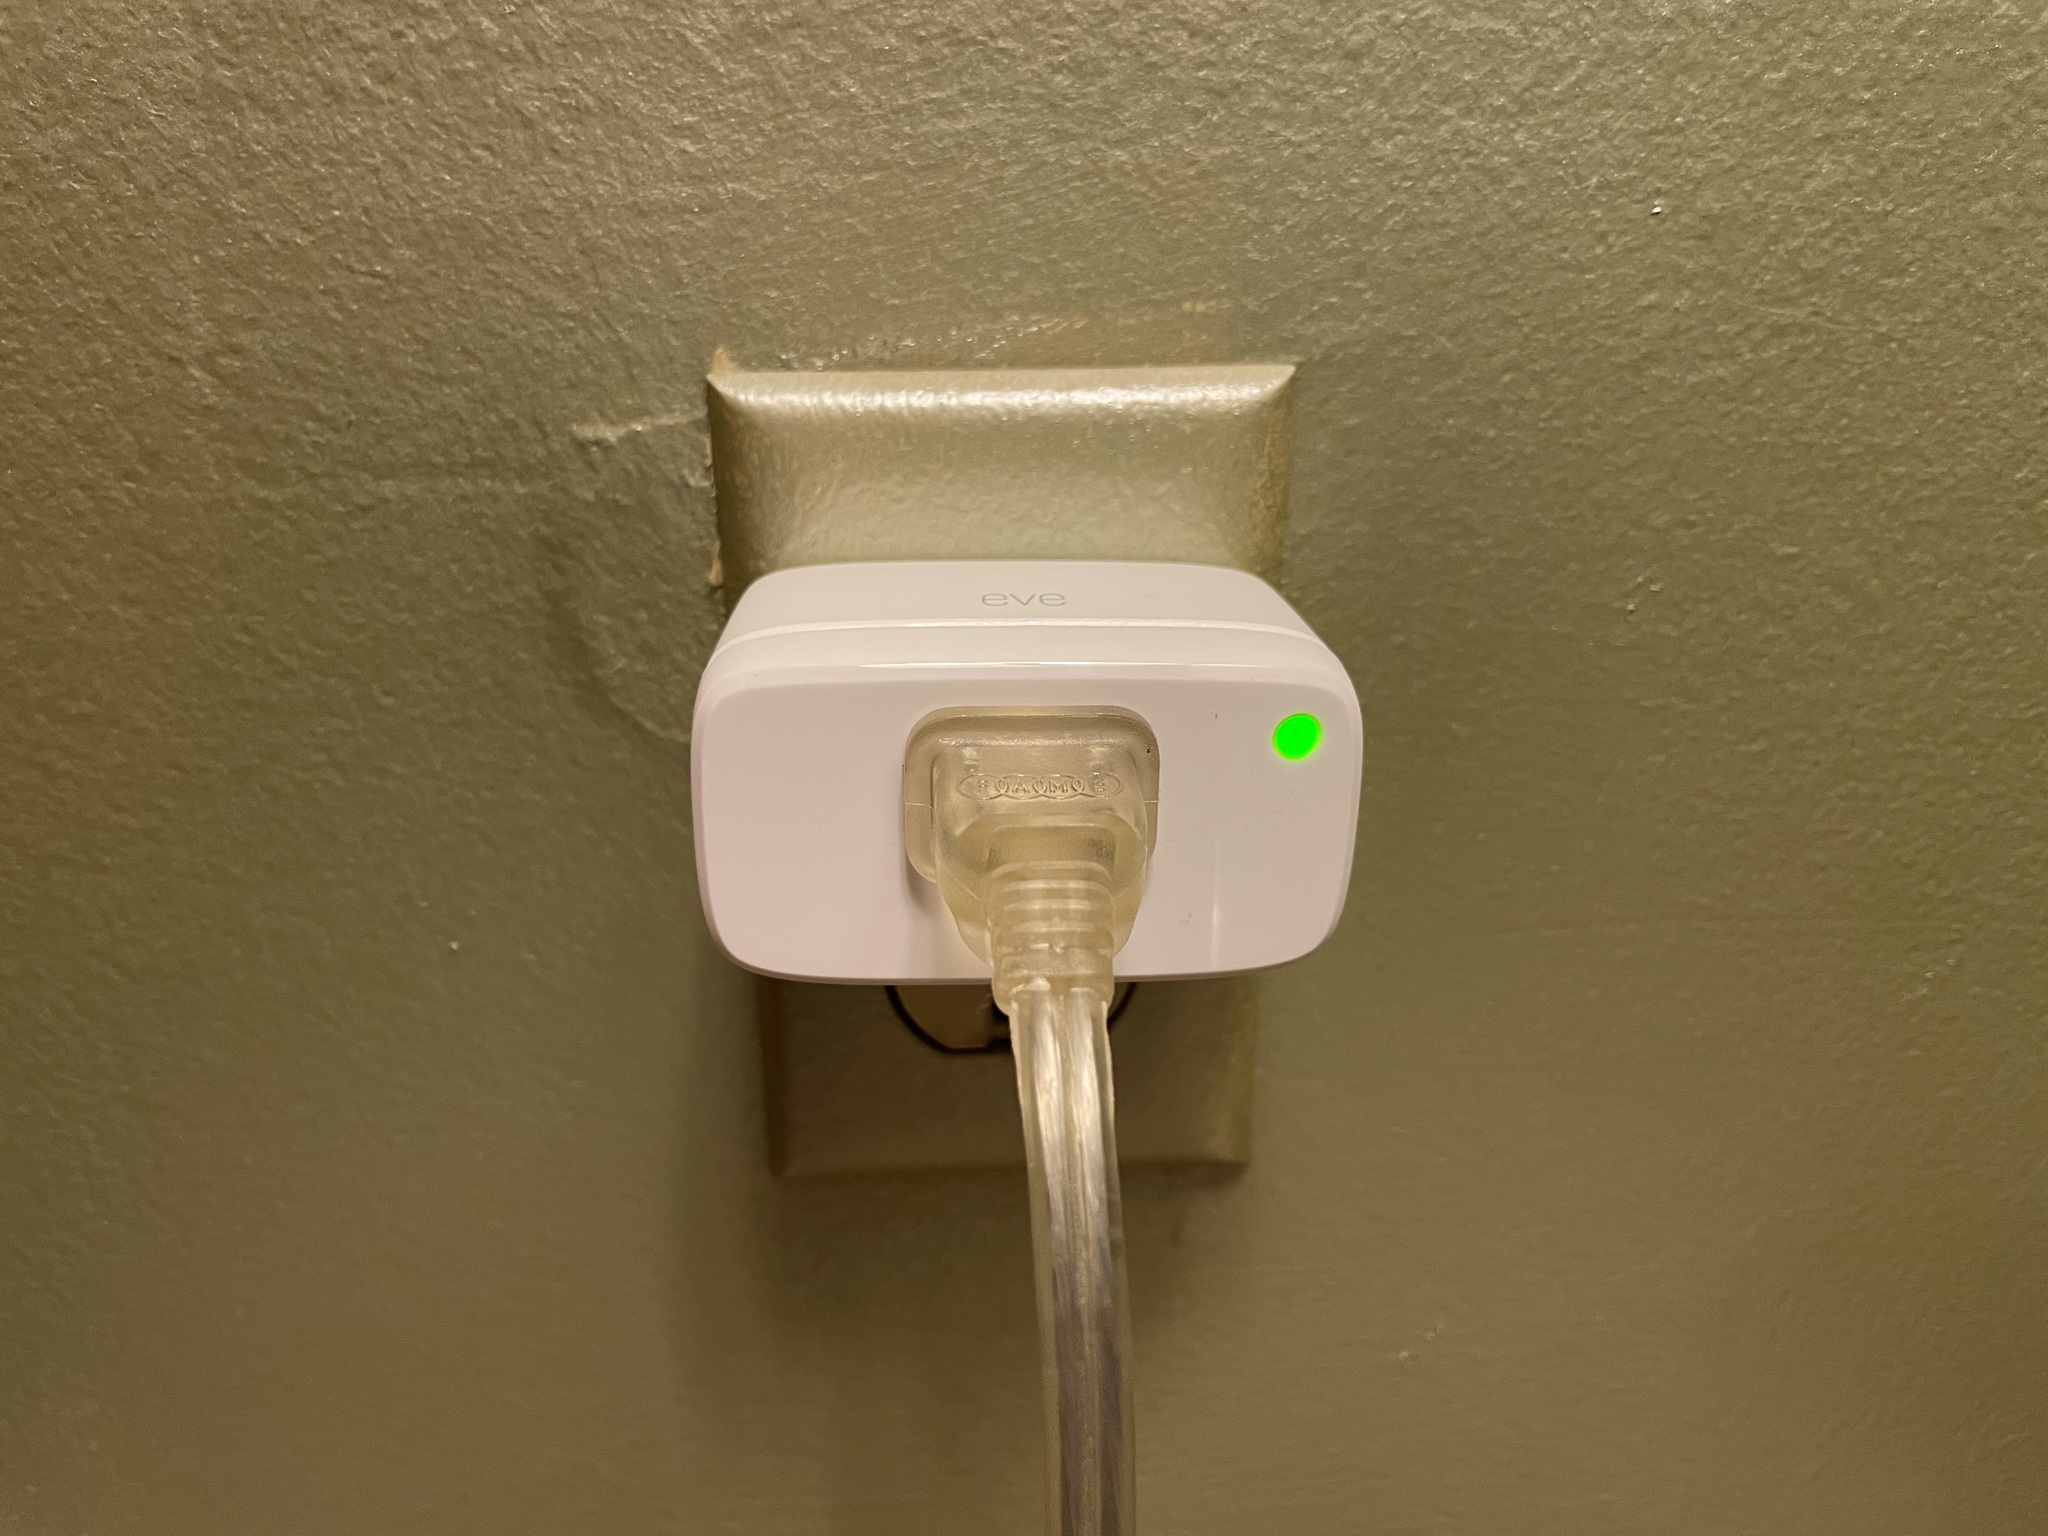 Eve Energy Smart Plug And Power Meter Lifestyle Plugged In On